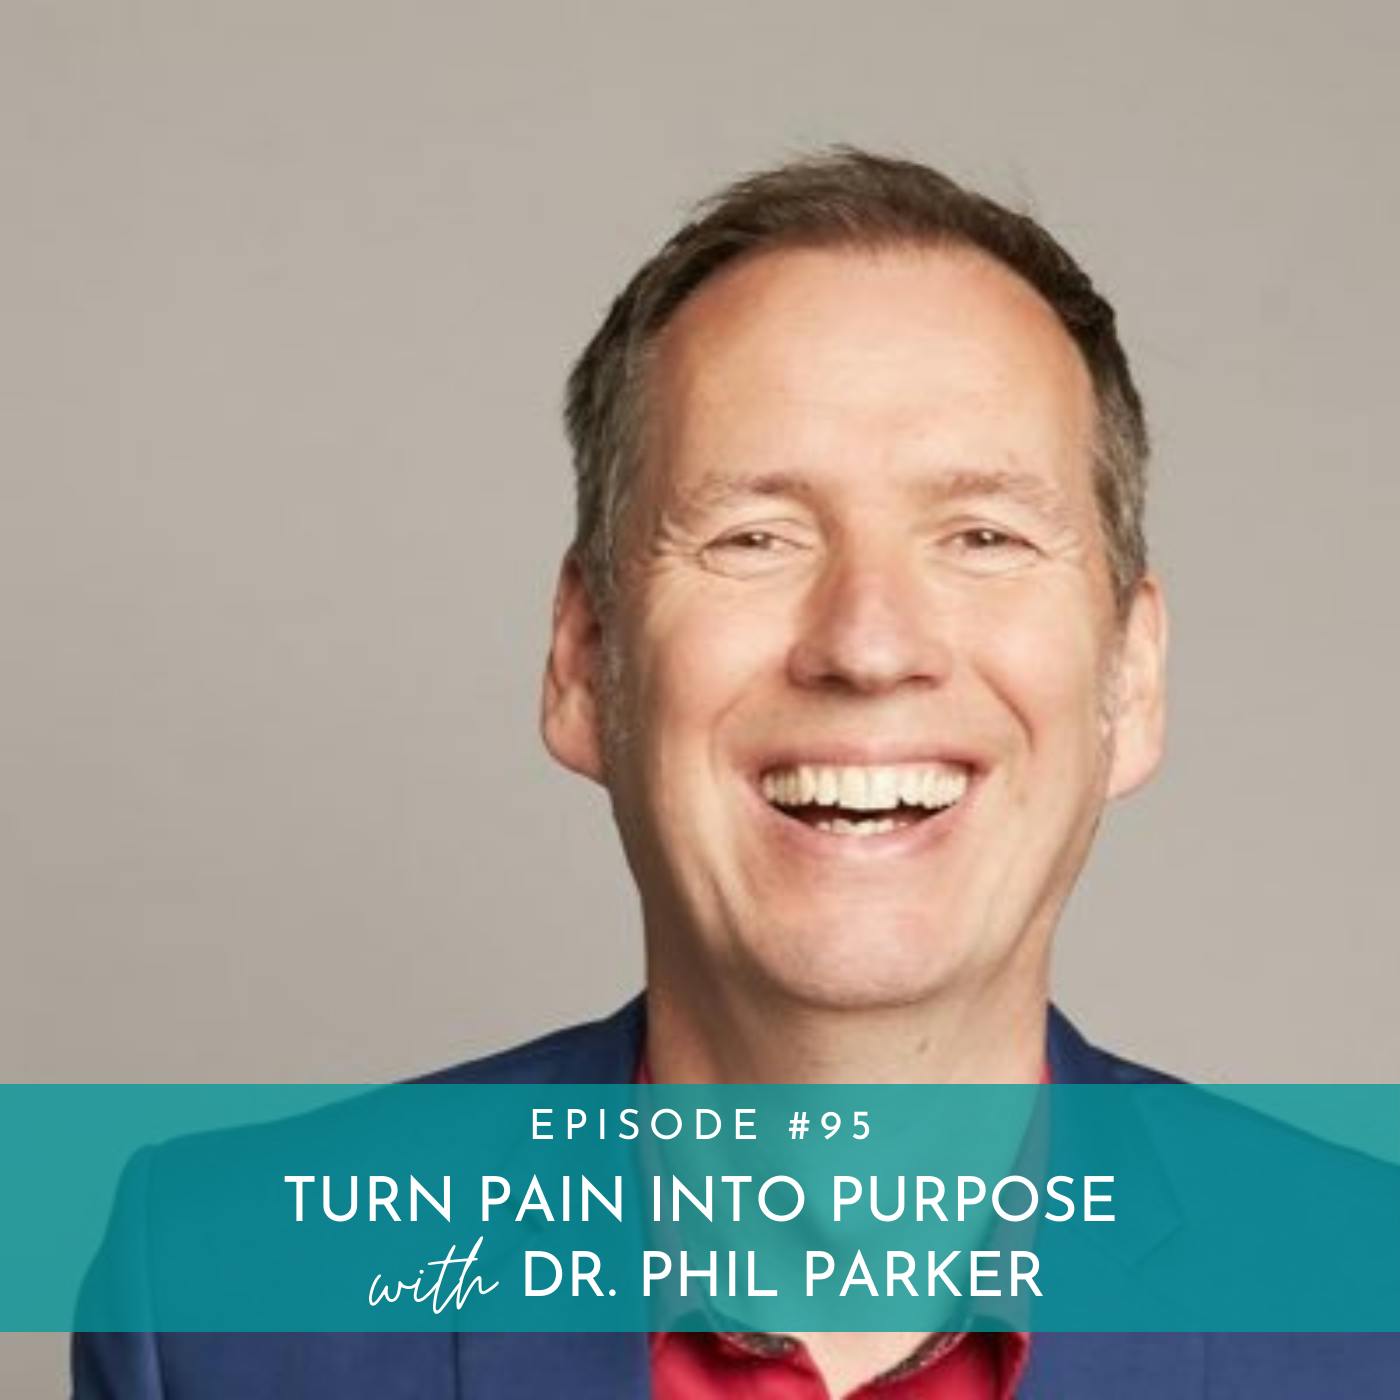 Turn Pain Into Purpose with Dr. Phil Parker